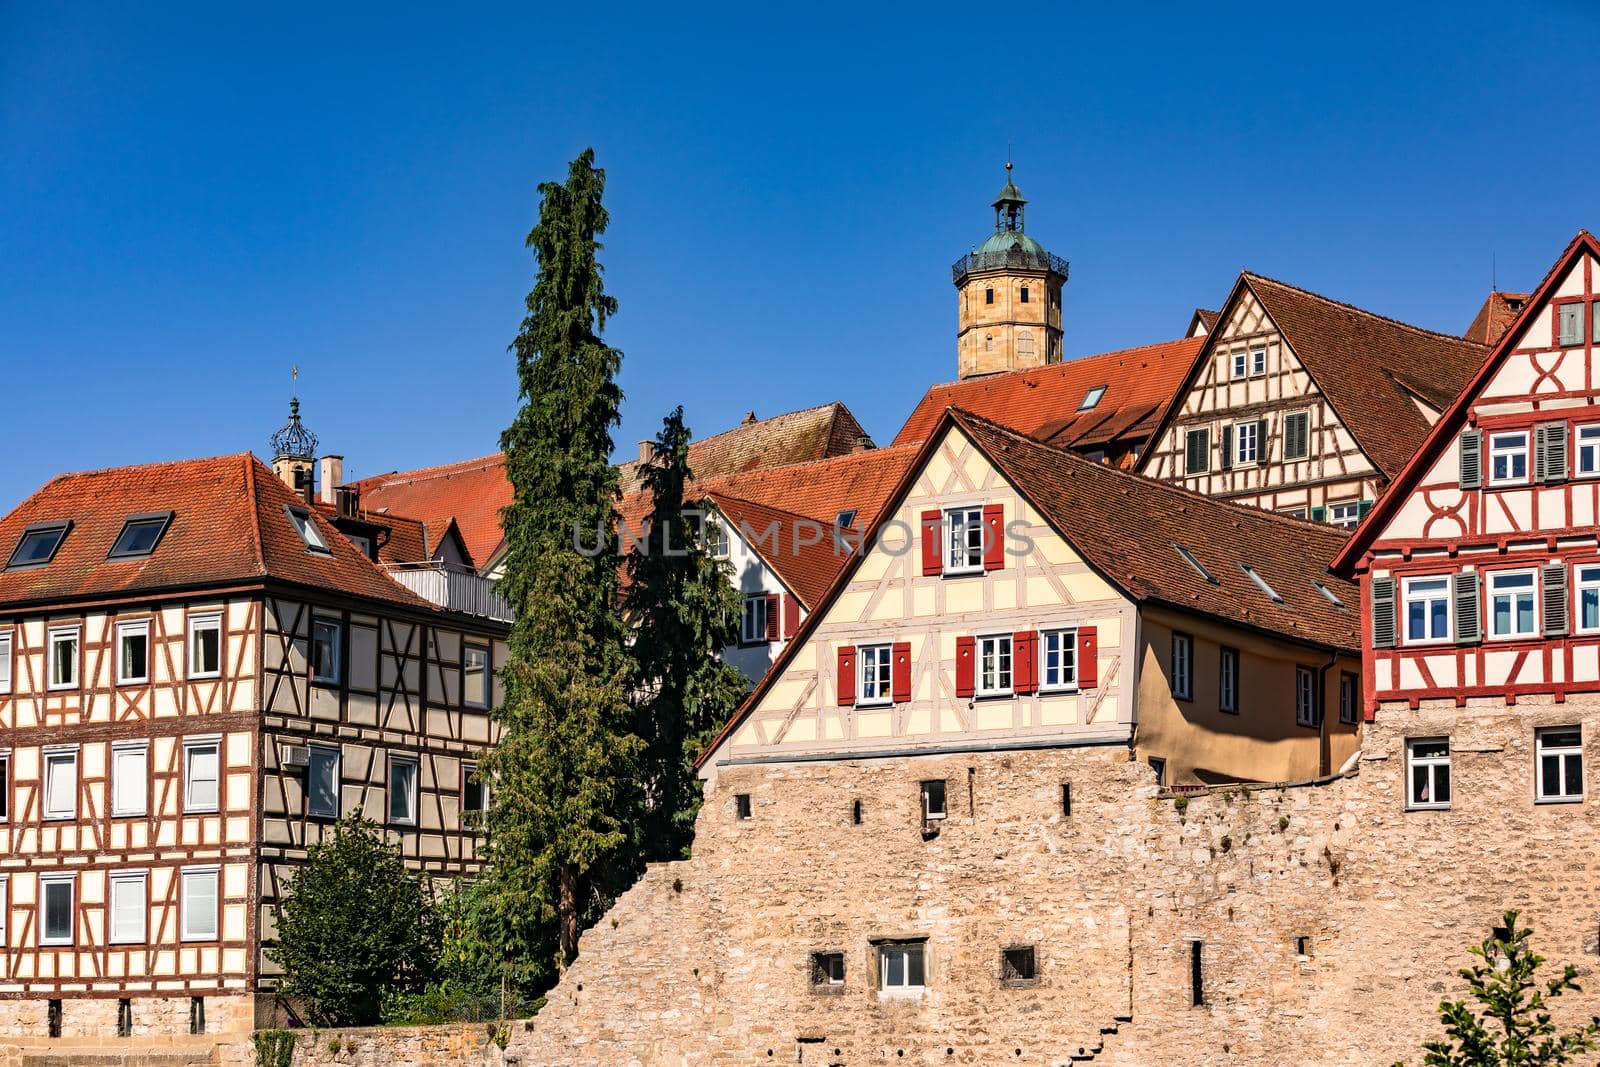 The historic old town of Schwaebisch Hall is well preserved and consists of a large number of half-timbered houses